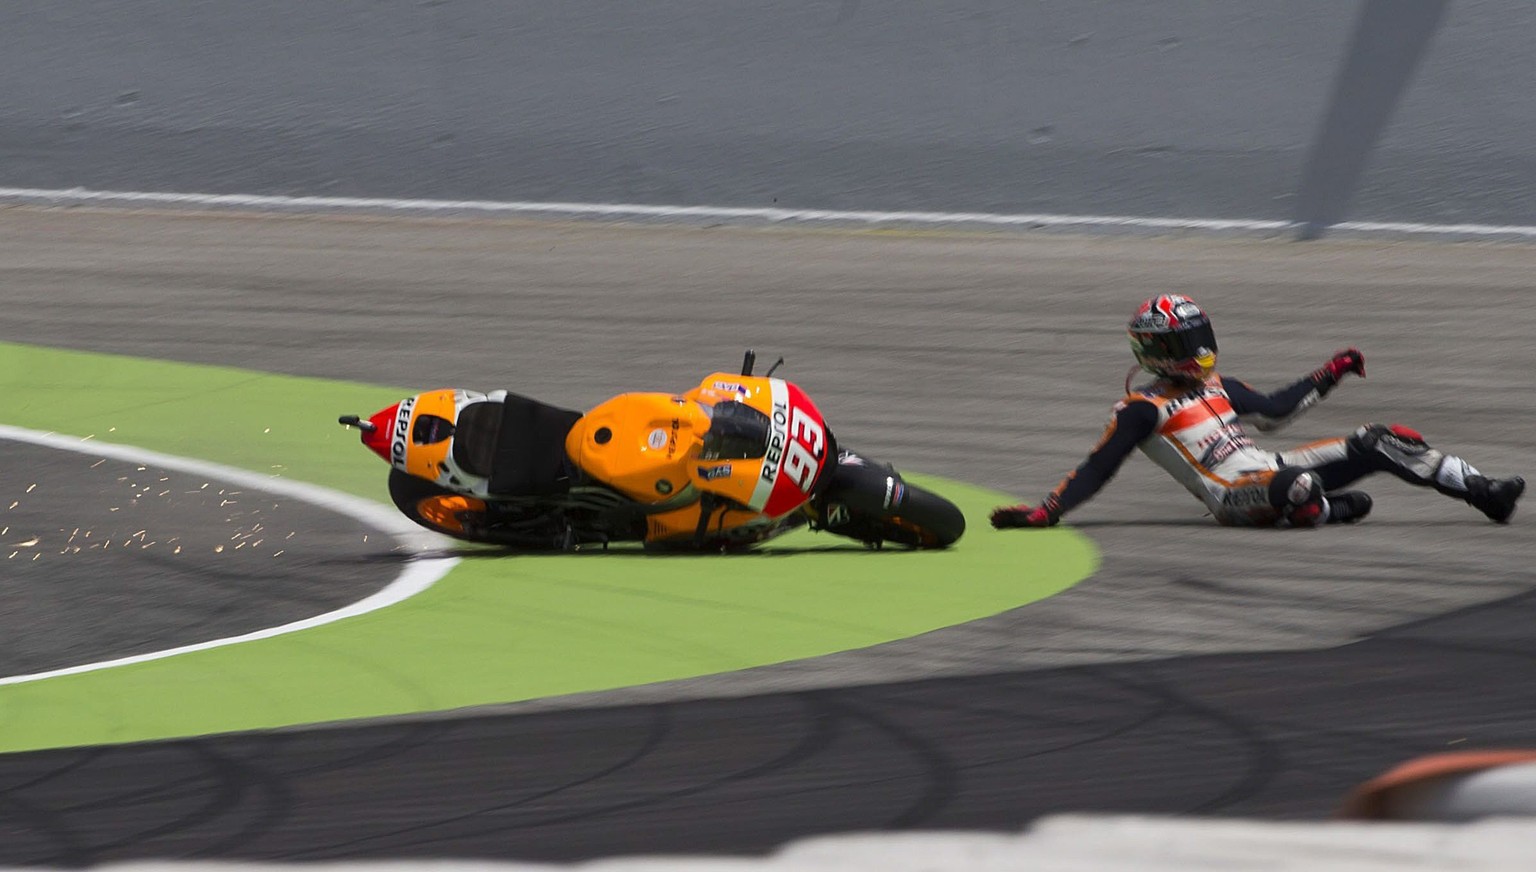 epa04255980 Spanish MotoGP rider of Repsol Honda team, Marc Marquez, crashes during the qualifying session at Montmelo circuit in Barcelona, northeastern Spain, 14 June 2014. The Grand Prix of Catalun ...